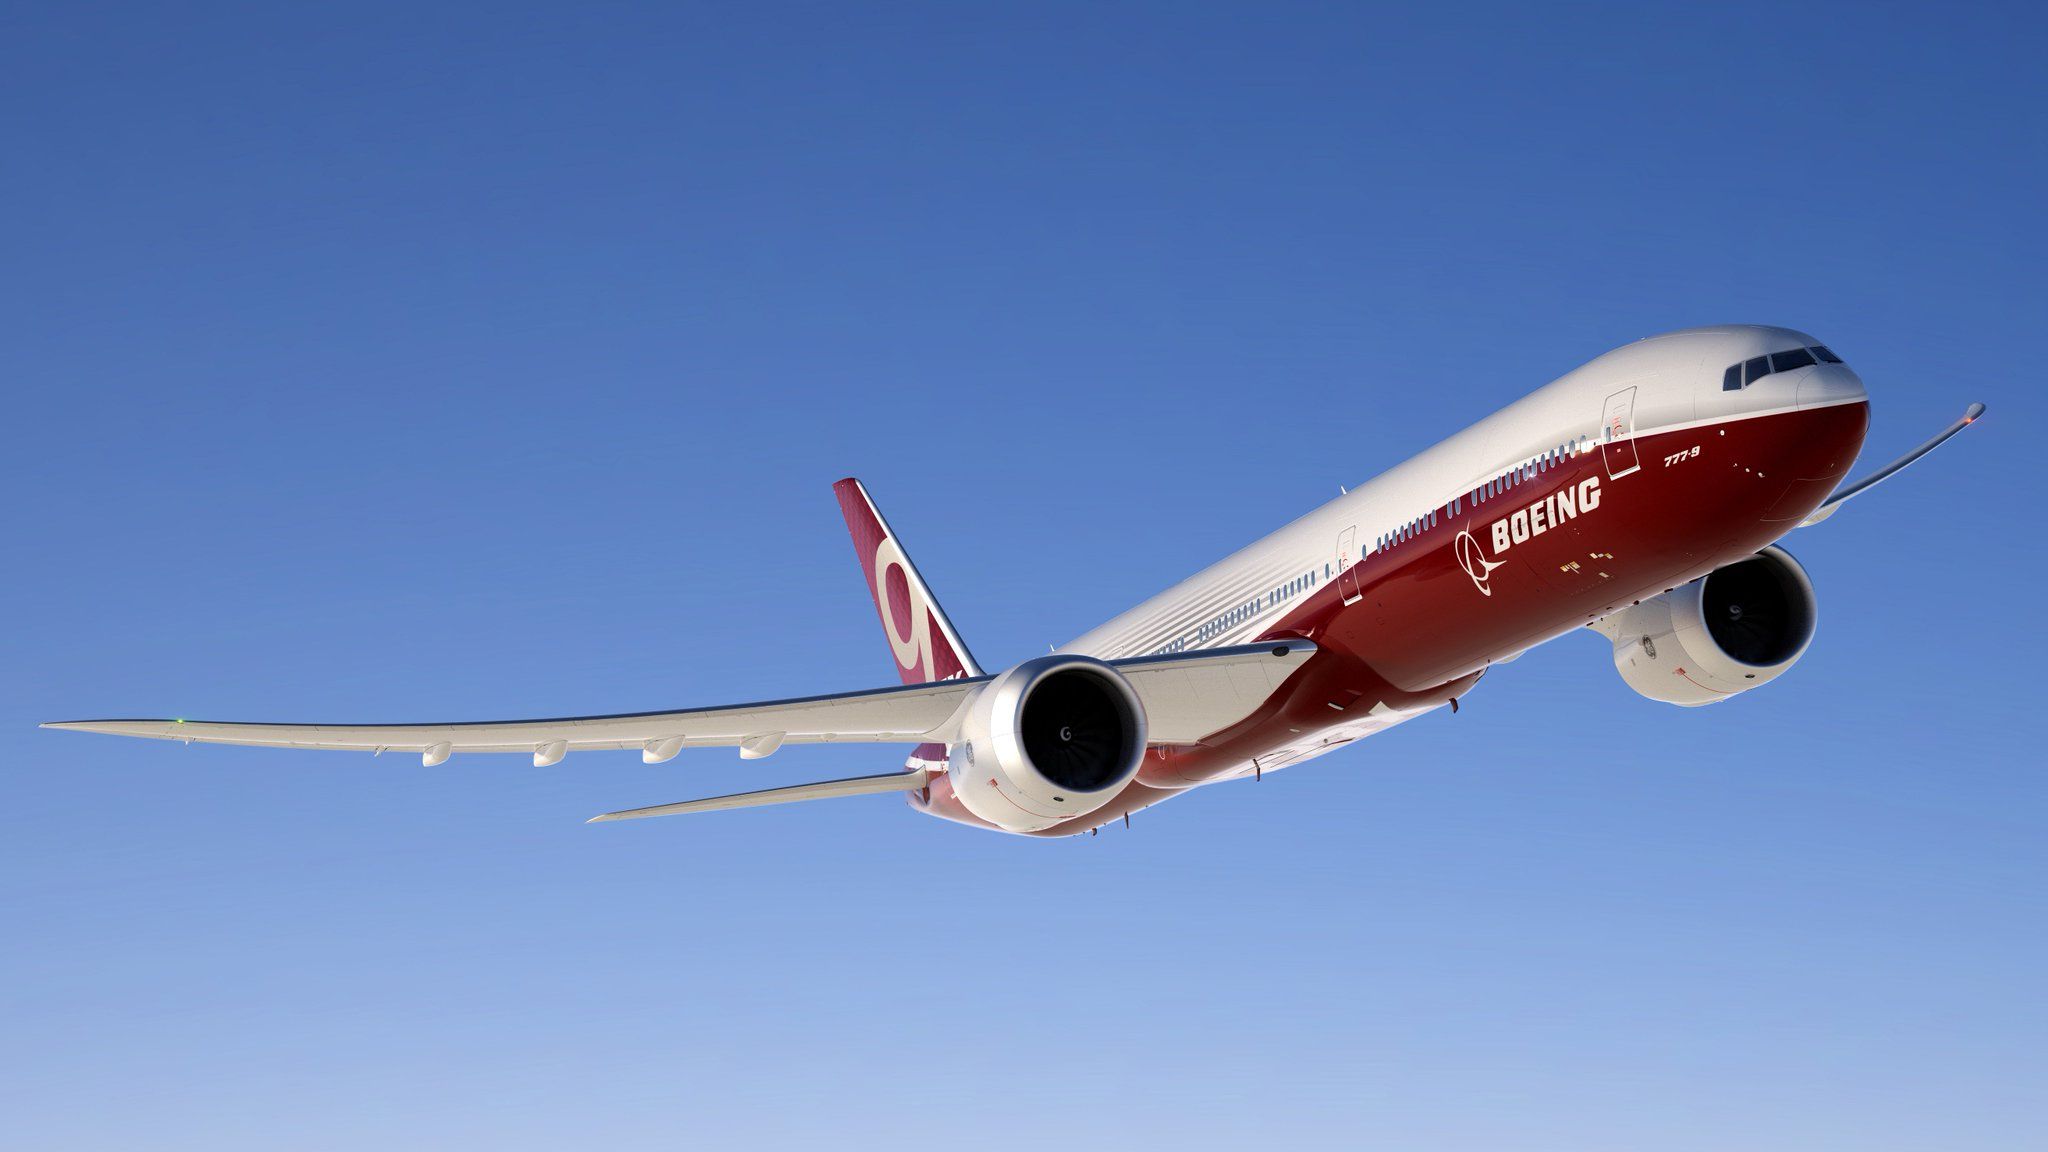 Boeing: twitter post about the 777X from @BoeingAirplanes